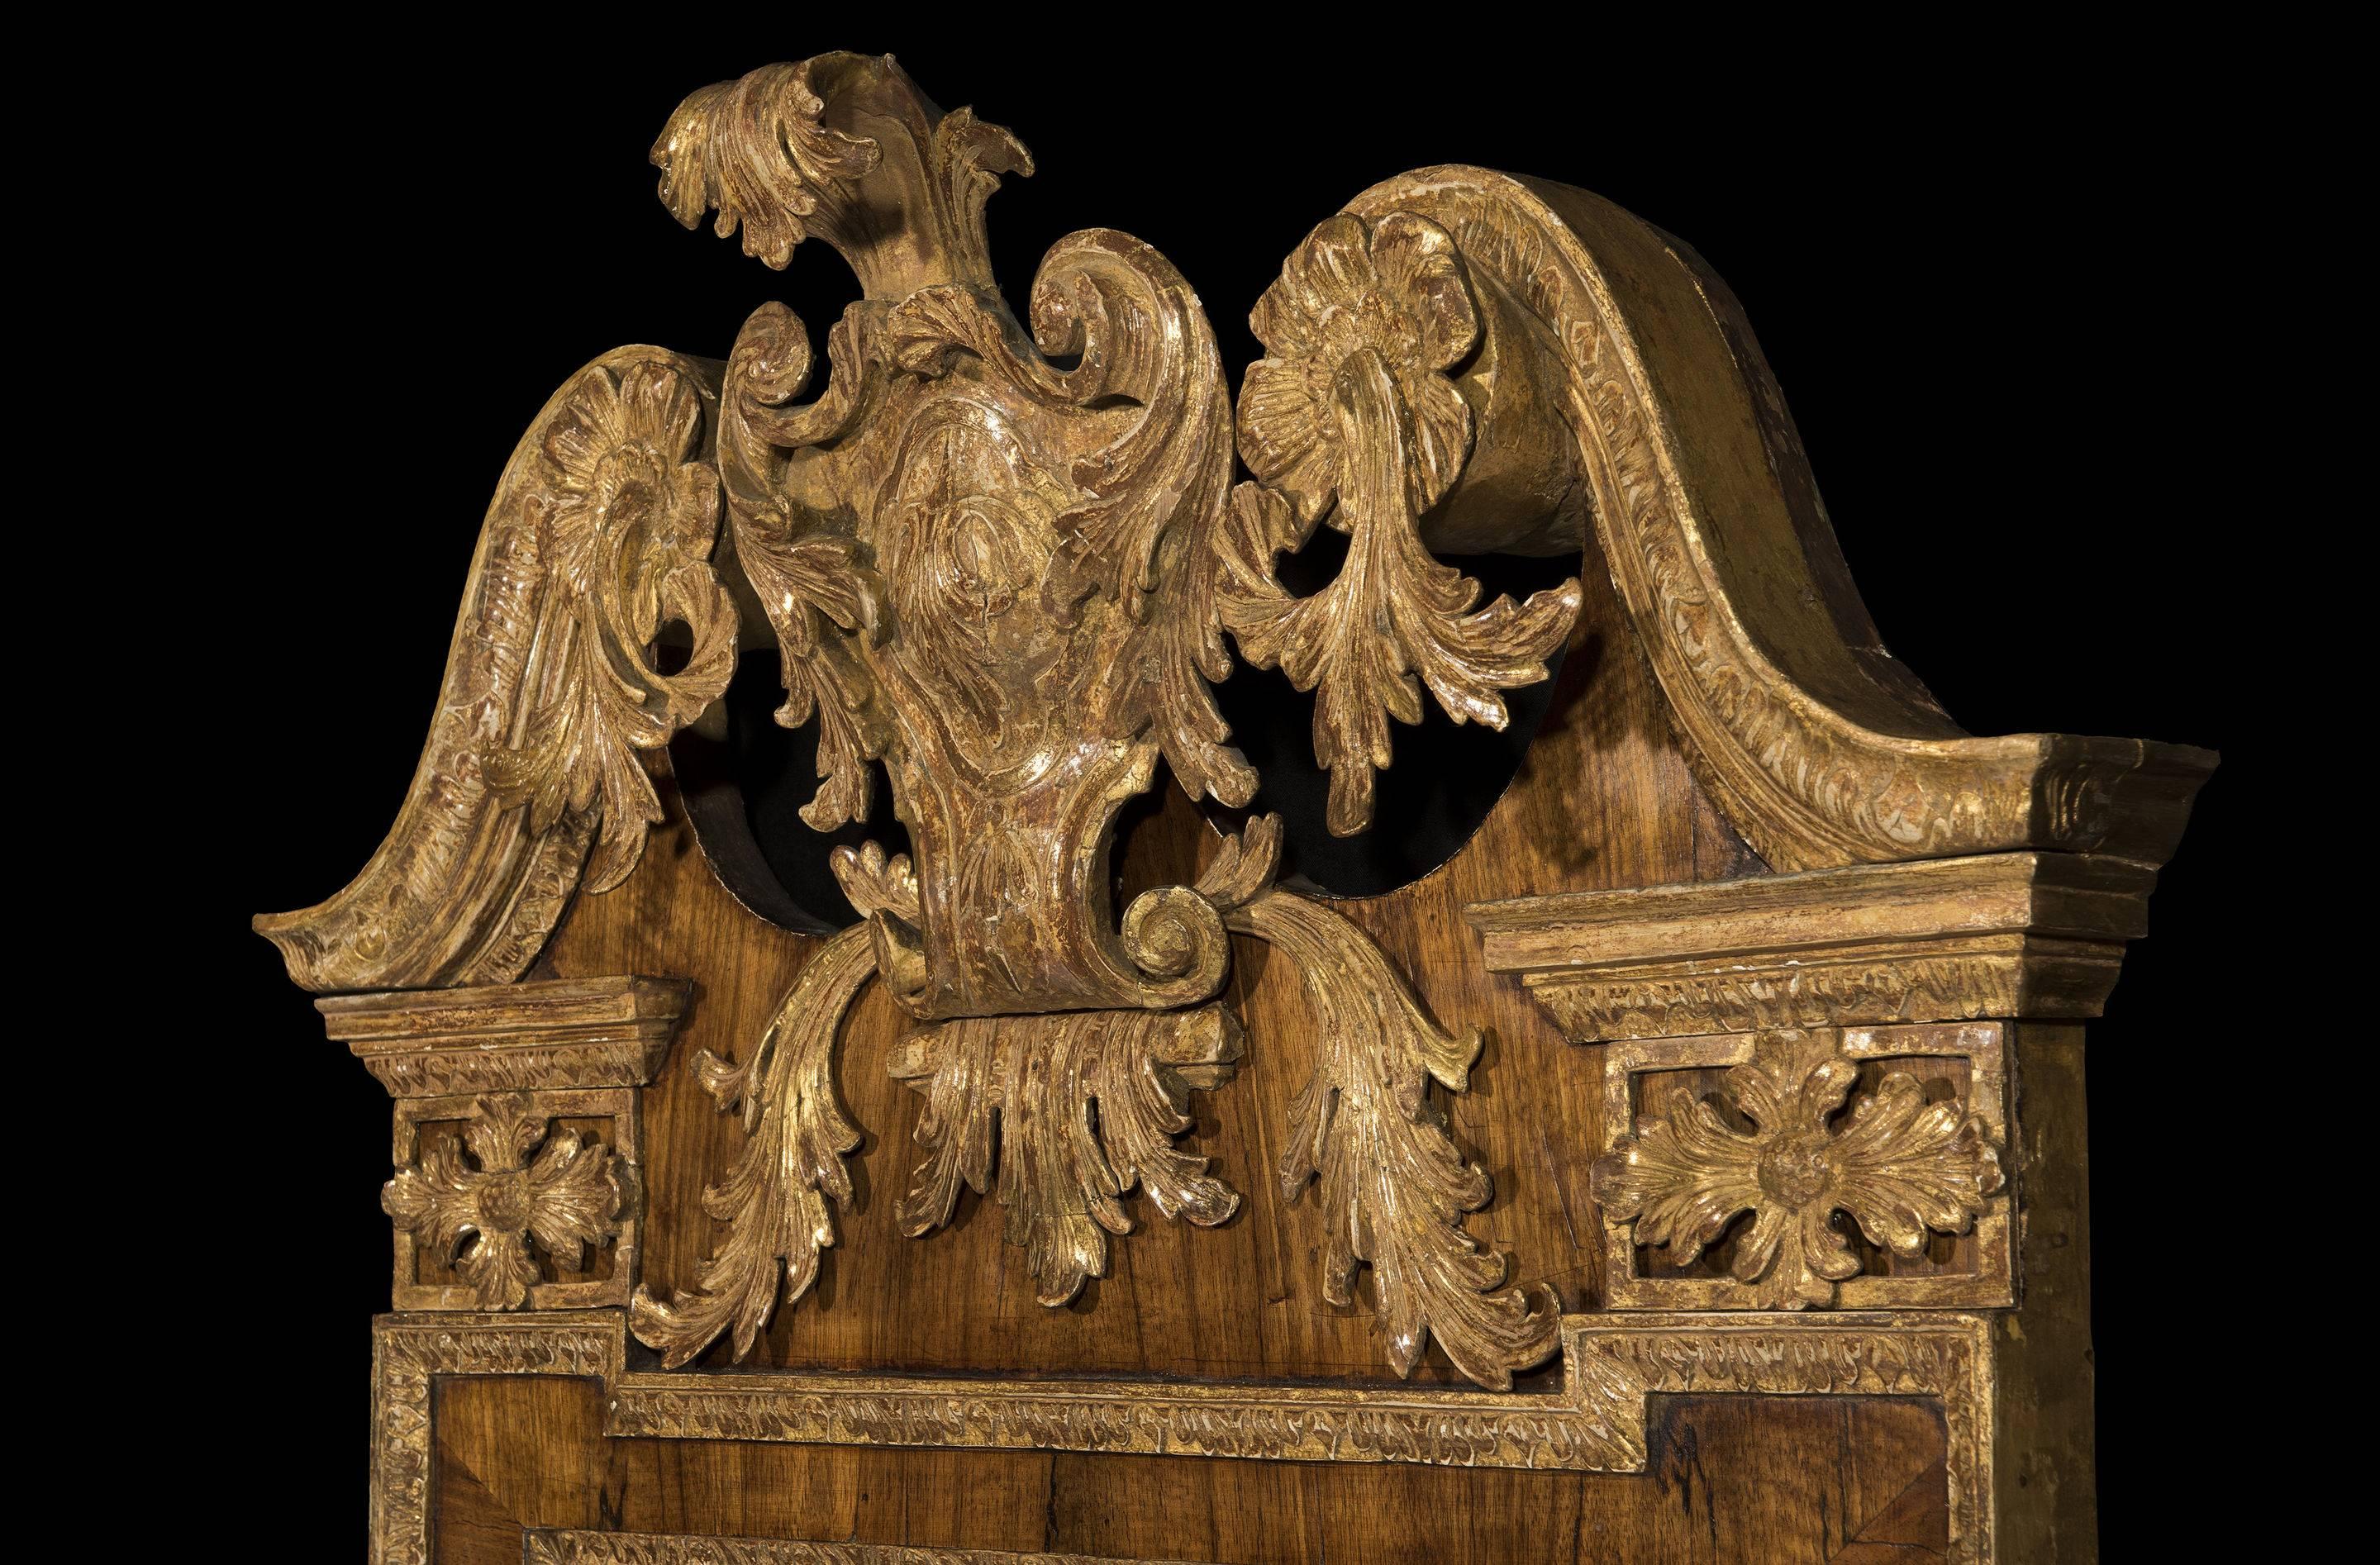 The top of the mirror has a pair of intricately leaf-carved giltwood swan-neck pediments each terminating in a flower rosette with trailing leaves. The centre crest with a scrolling leaf pediment and 'C' scrolled decoration is surmounted on a walnut